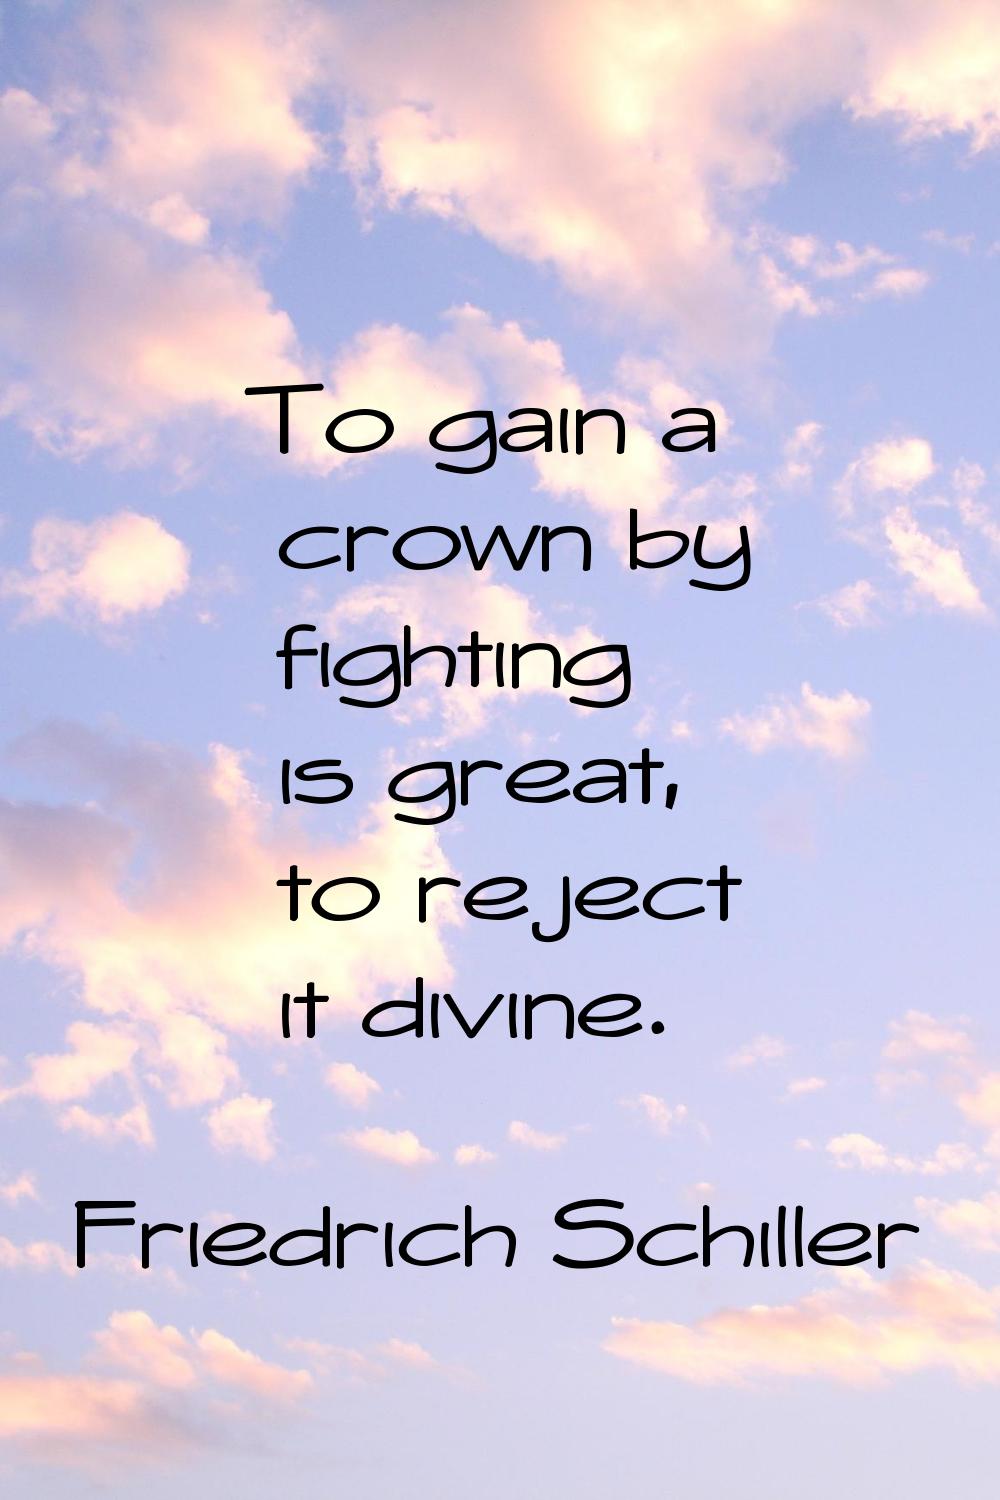 To gain a crown by fighting is great, to reject it divine.